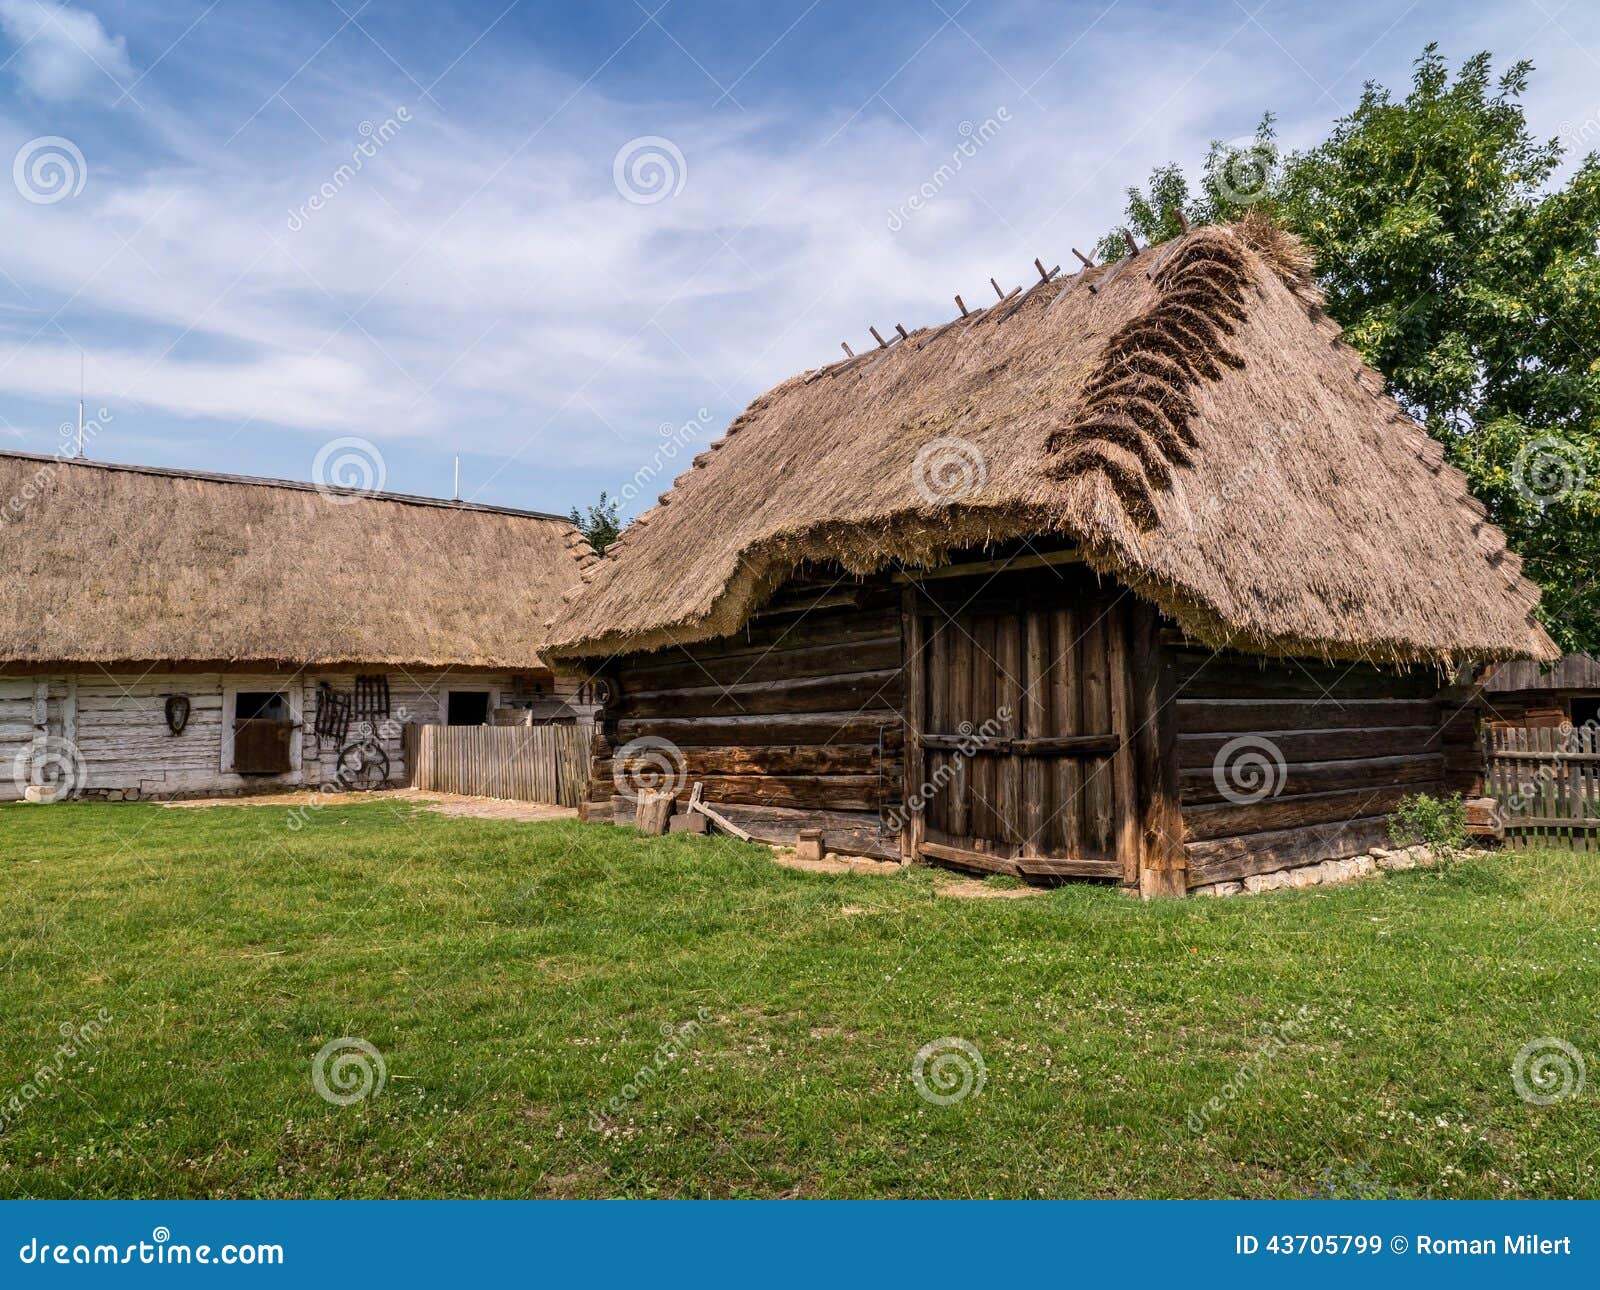 Old farmstead stock image. Image of architecture, vintage ...